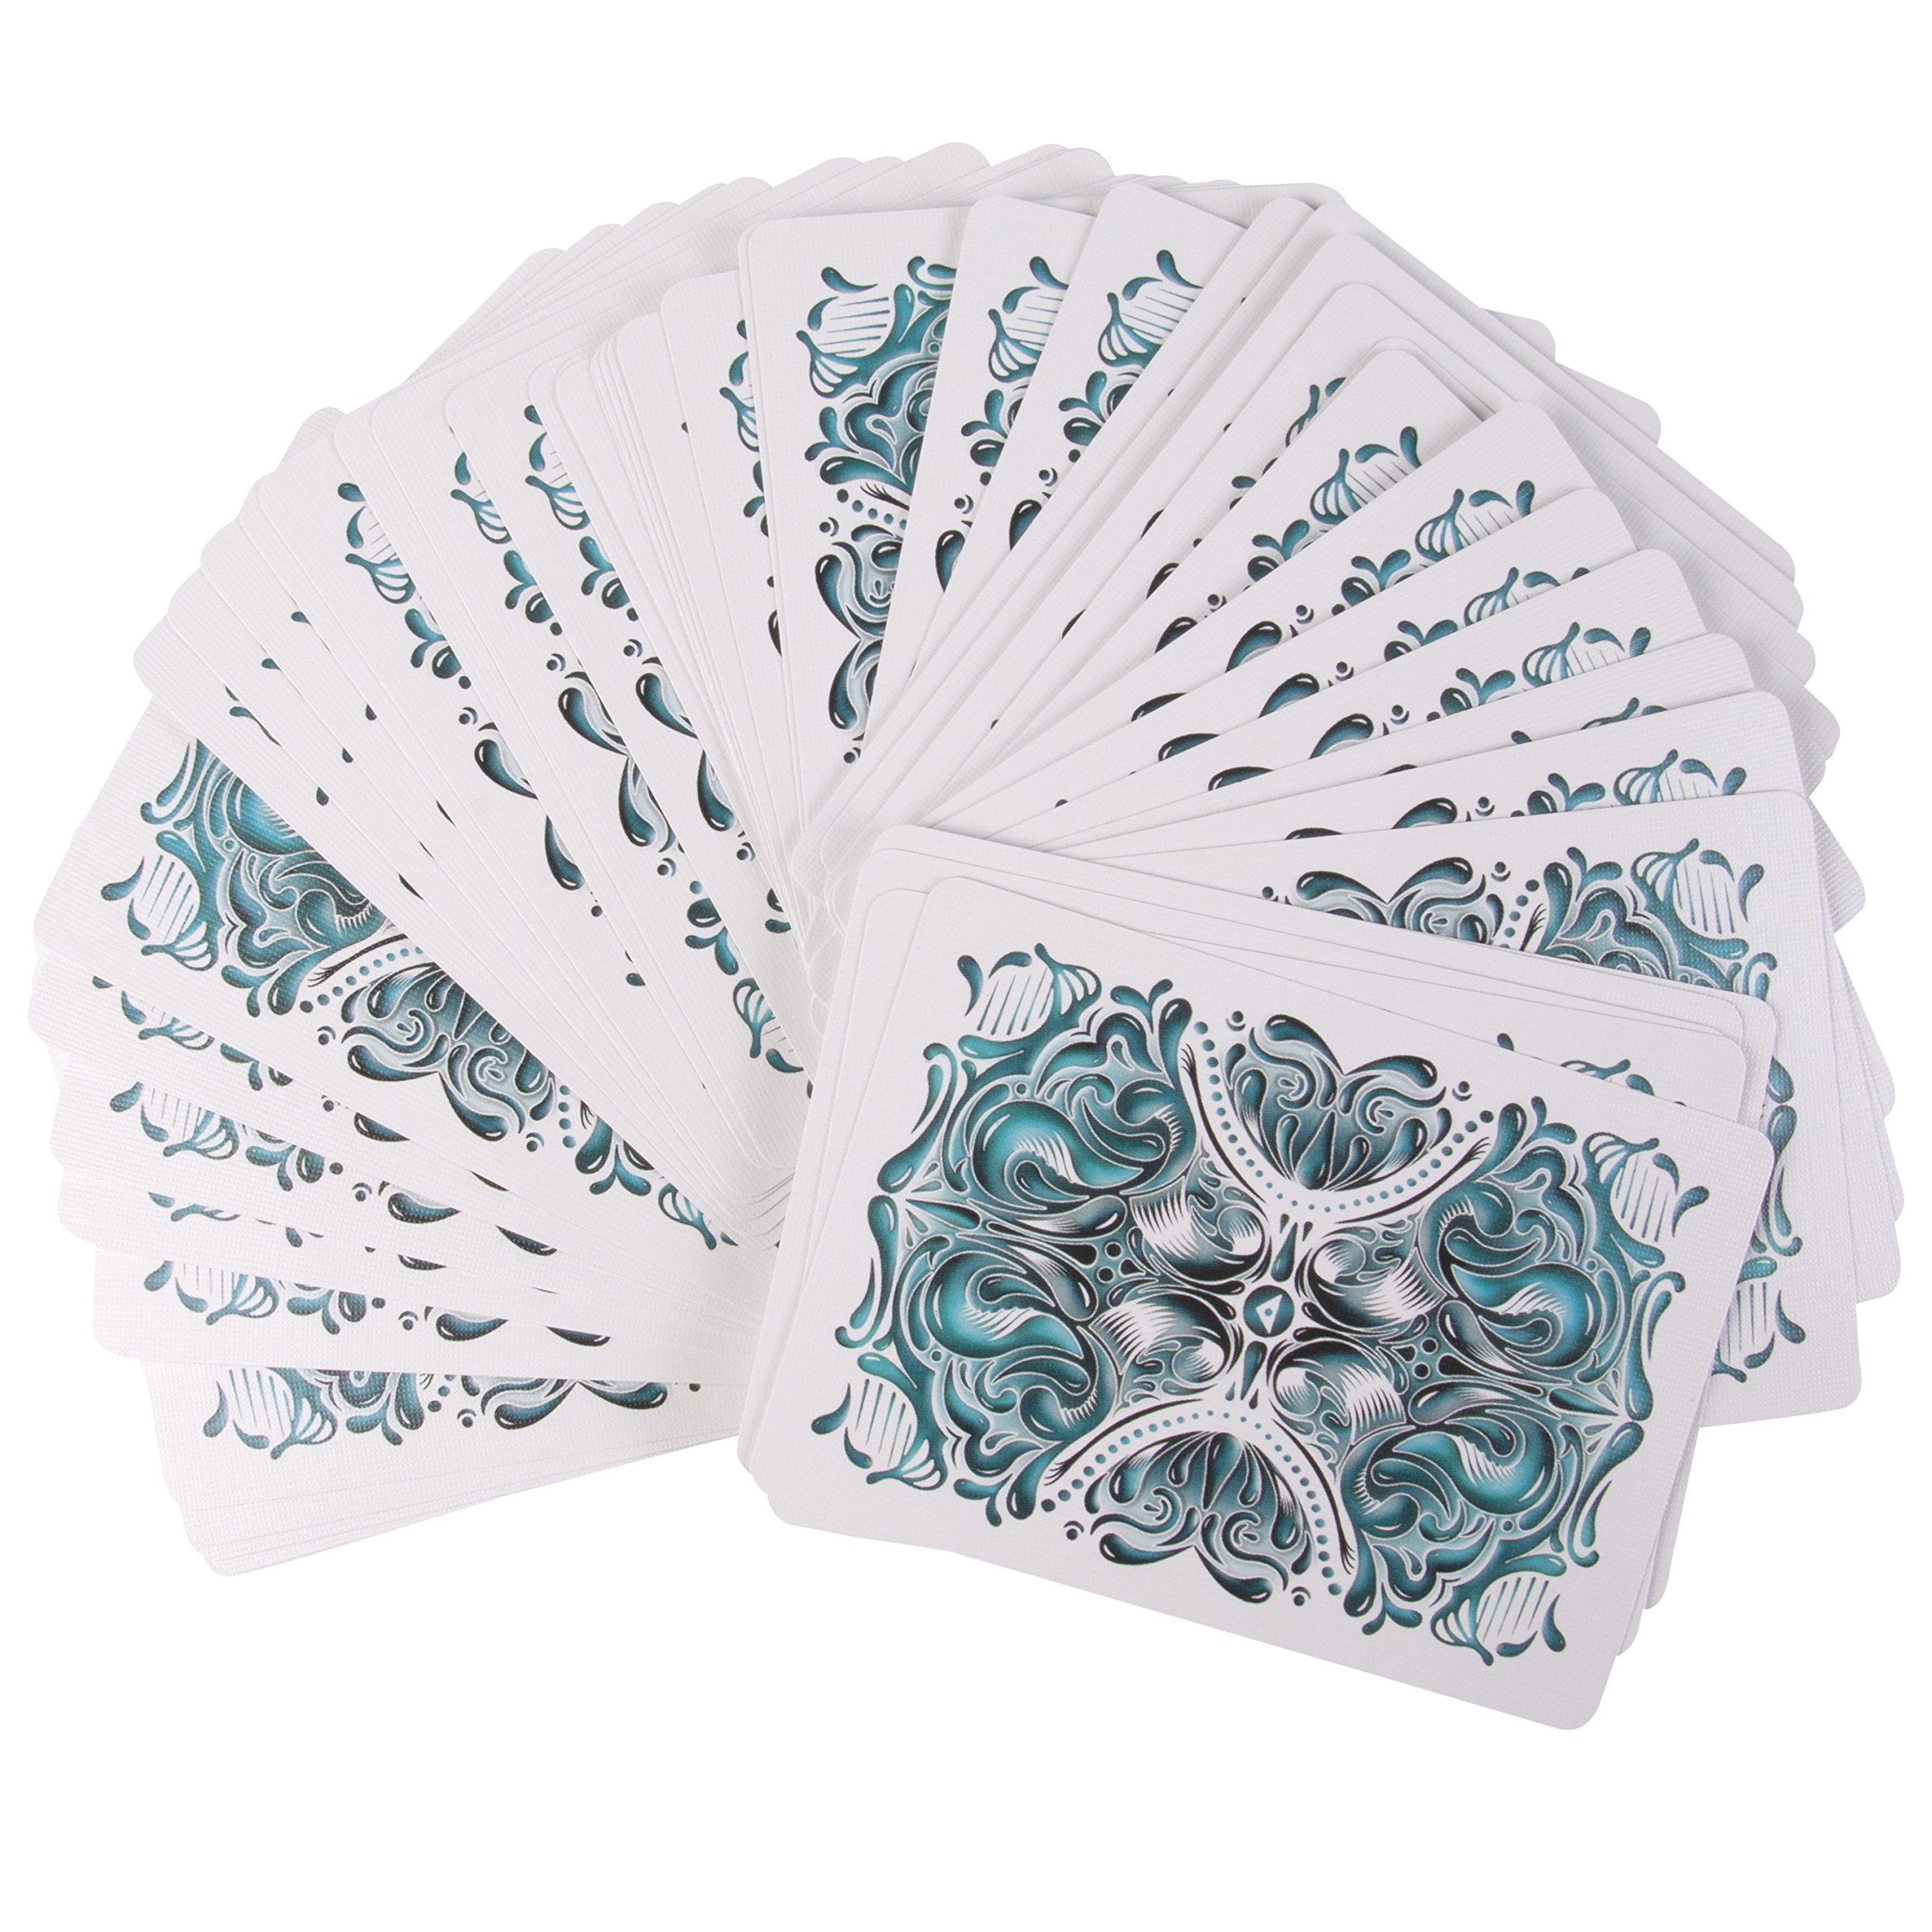 Ellusionist Fathom Playing Card Deck - Water Ocean Themed - For Games and Magic Tricks